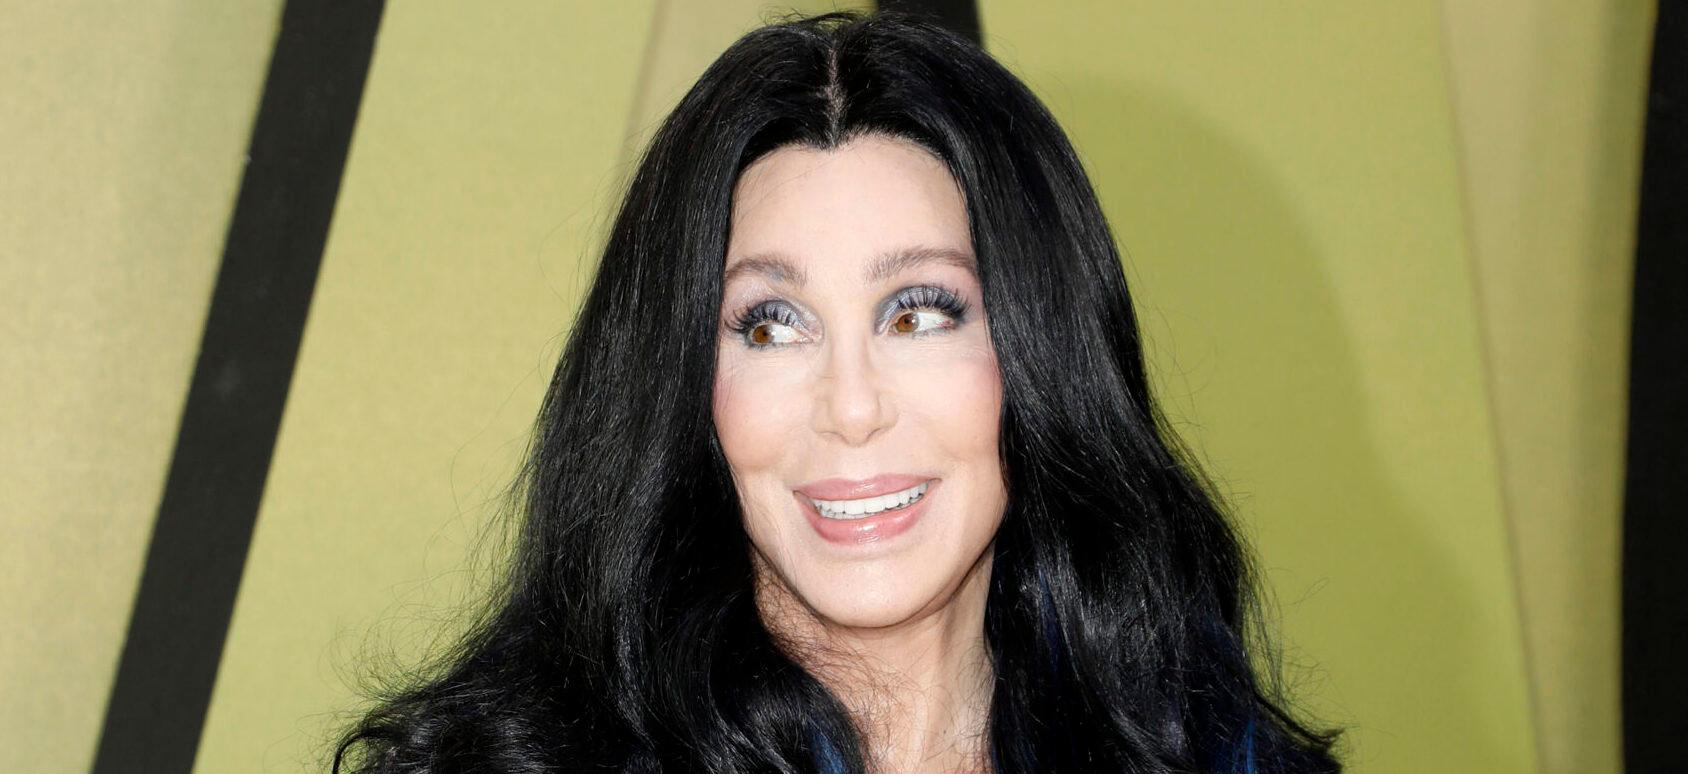 Fans Celebrate With Cher As She Dismisses ‘Numbers’ In Birthday Post